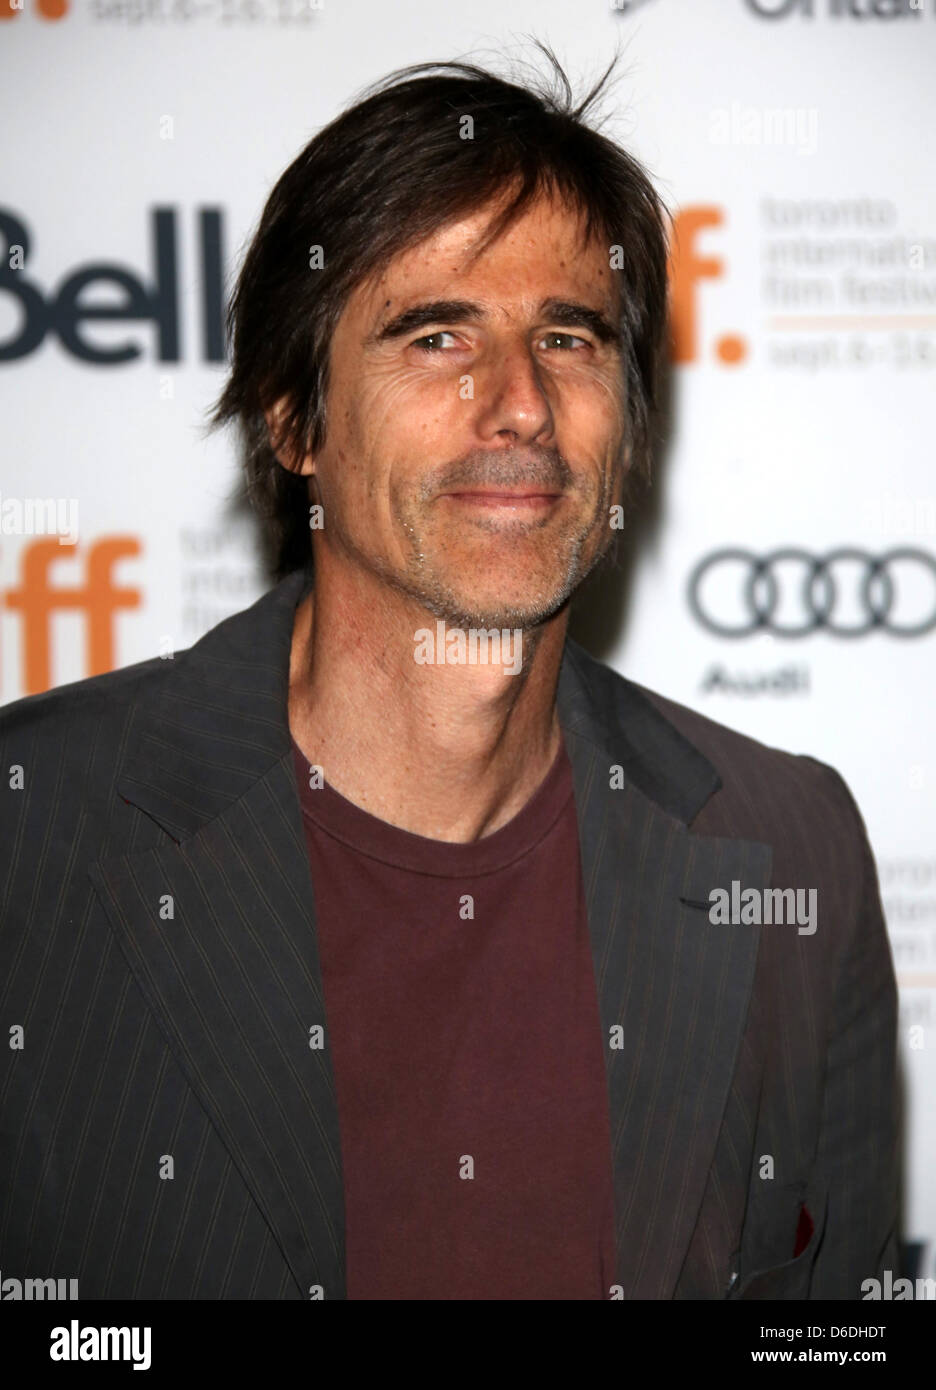 Director Walter Salles arrives at the premiere of 'On The Road' during the Toronto International Film Festival at Ryserson Theatre in Toronto, Canada, on 06 September 2012. Photo: Hubert Boesl Stock Photo